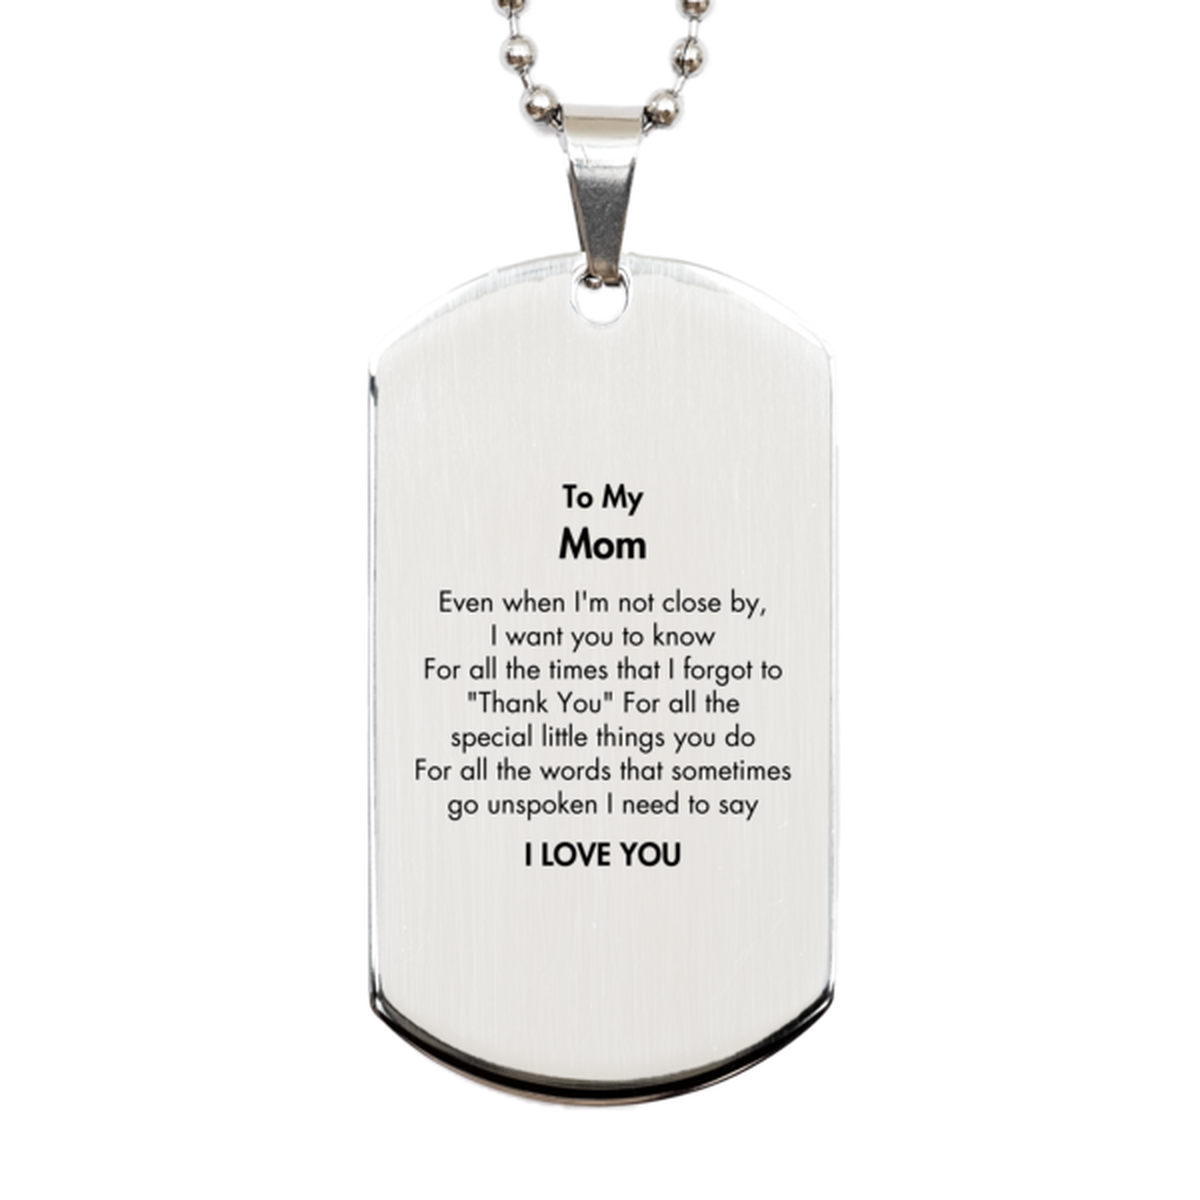 Thank You Gifts for Mom, Keepsake Silver Dog Tag Gifts for Mom Birthday Mother's day Father's Day Mom For all the words That sometimes go unspoken I need to say I LOVE YOU